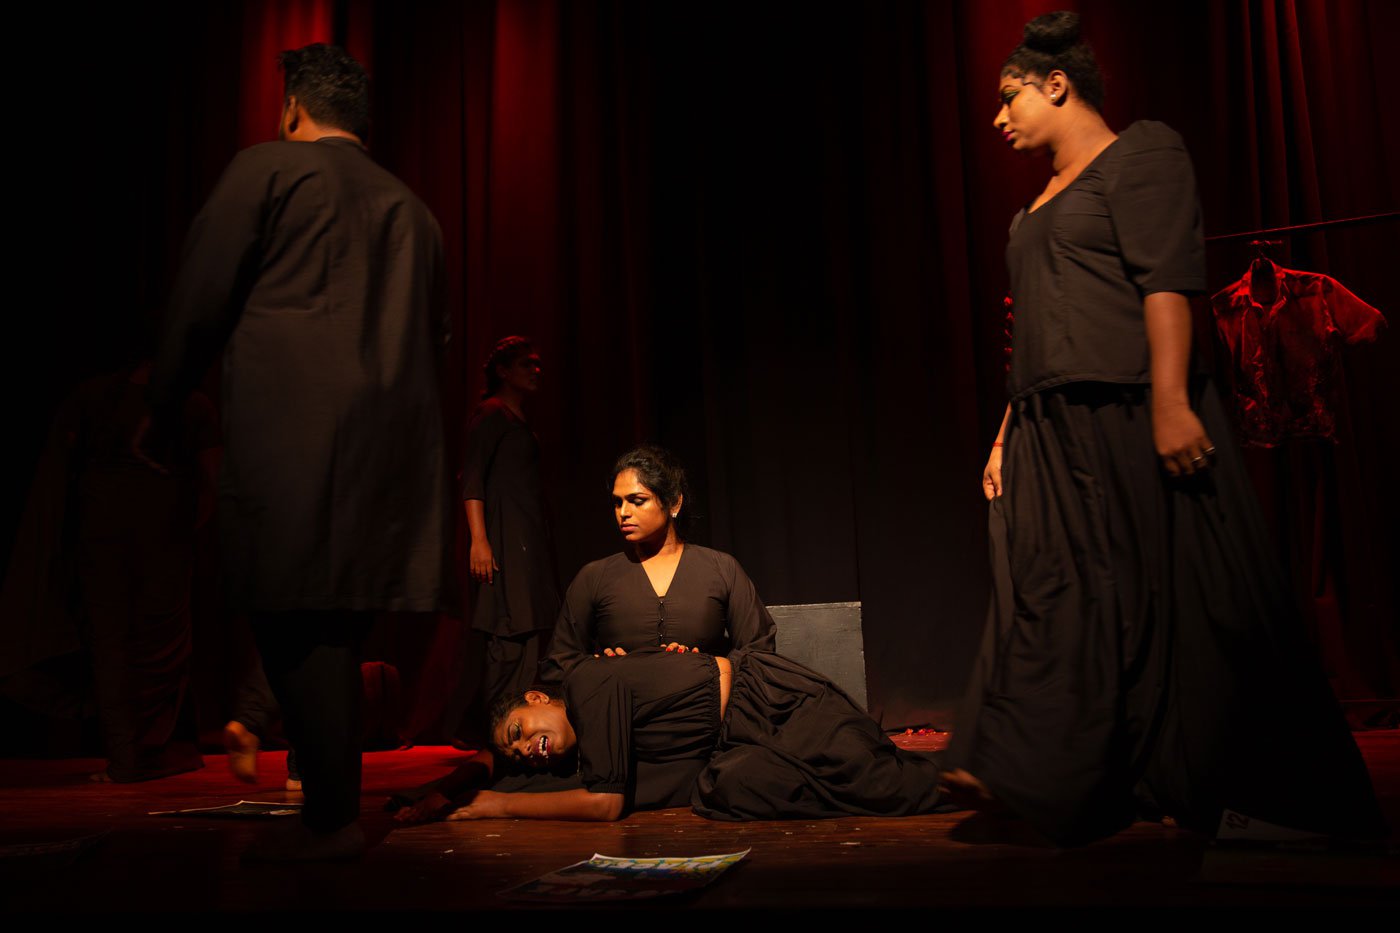 A scene from the play shows traumatic childhood experiences of conversion therapy, humiliation and abuse for not fitting into gender-mandated roles